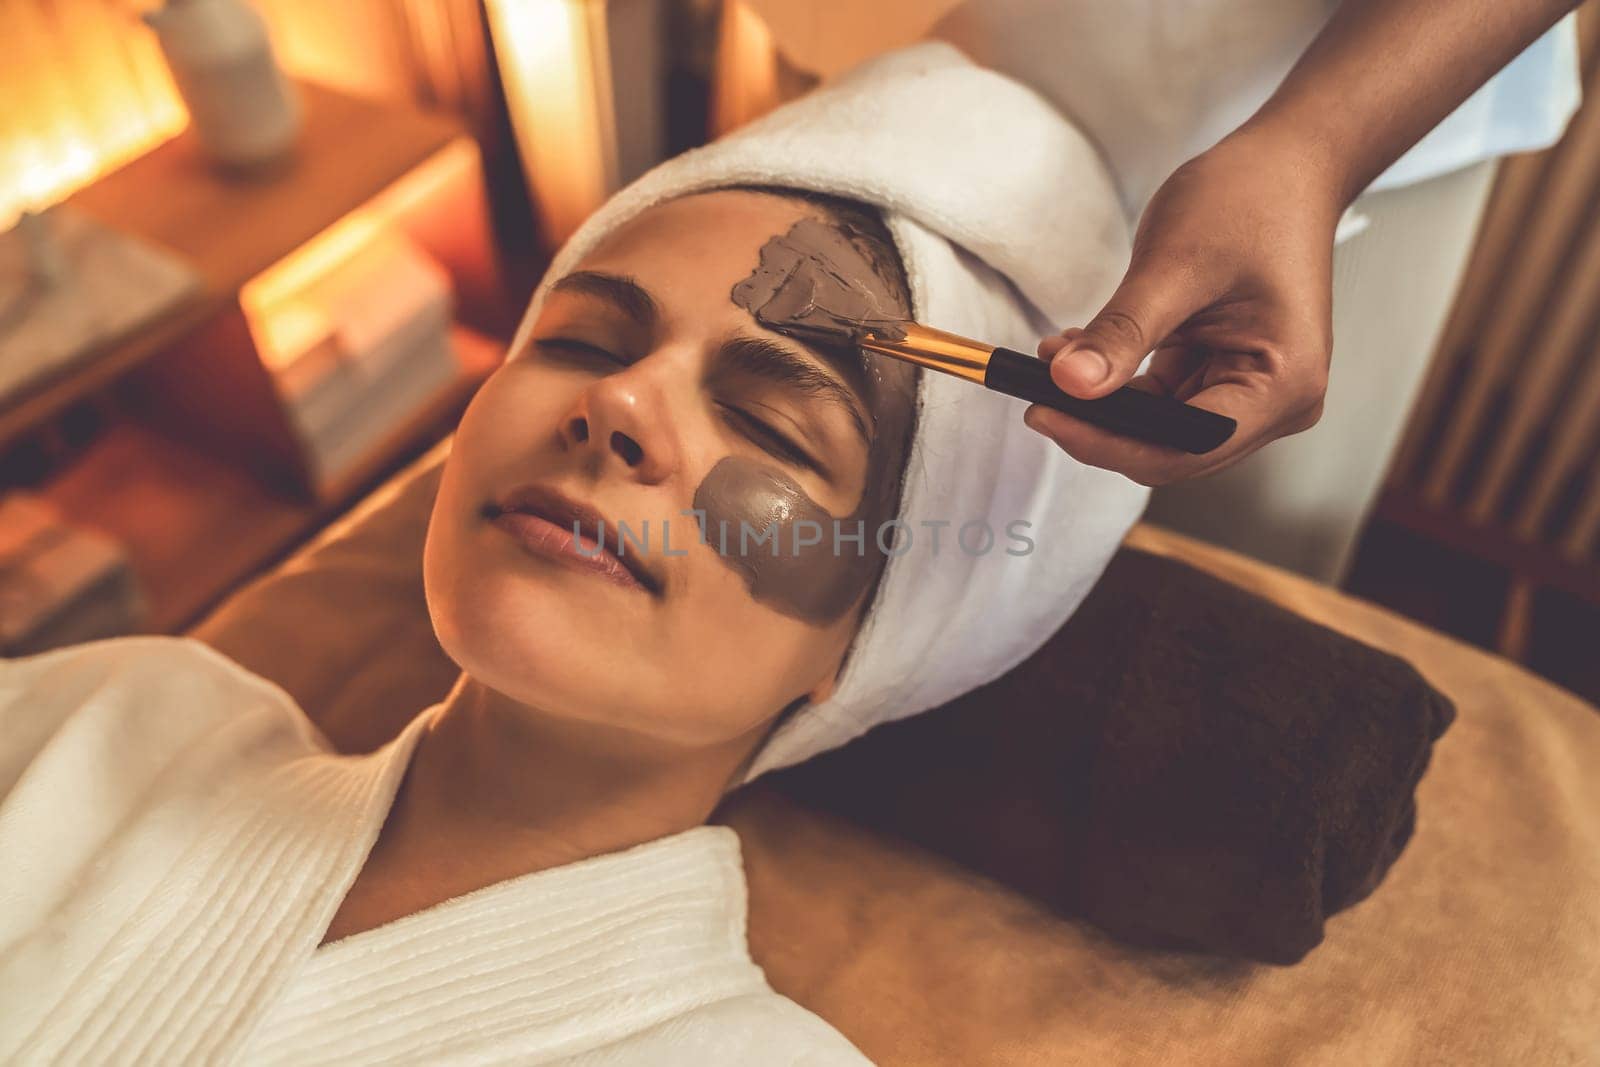 Serene ambiance of spa salon, woman customer indulges in rejuvenating with charcoal face cream massage with warm lighting candle. Facial skin treatment and beauty care concept. Quiescent